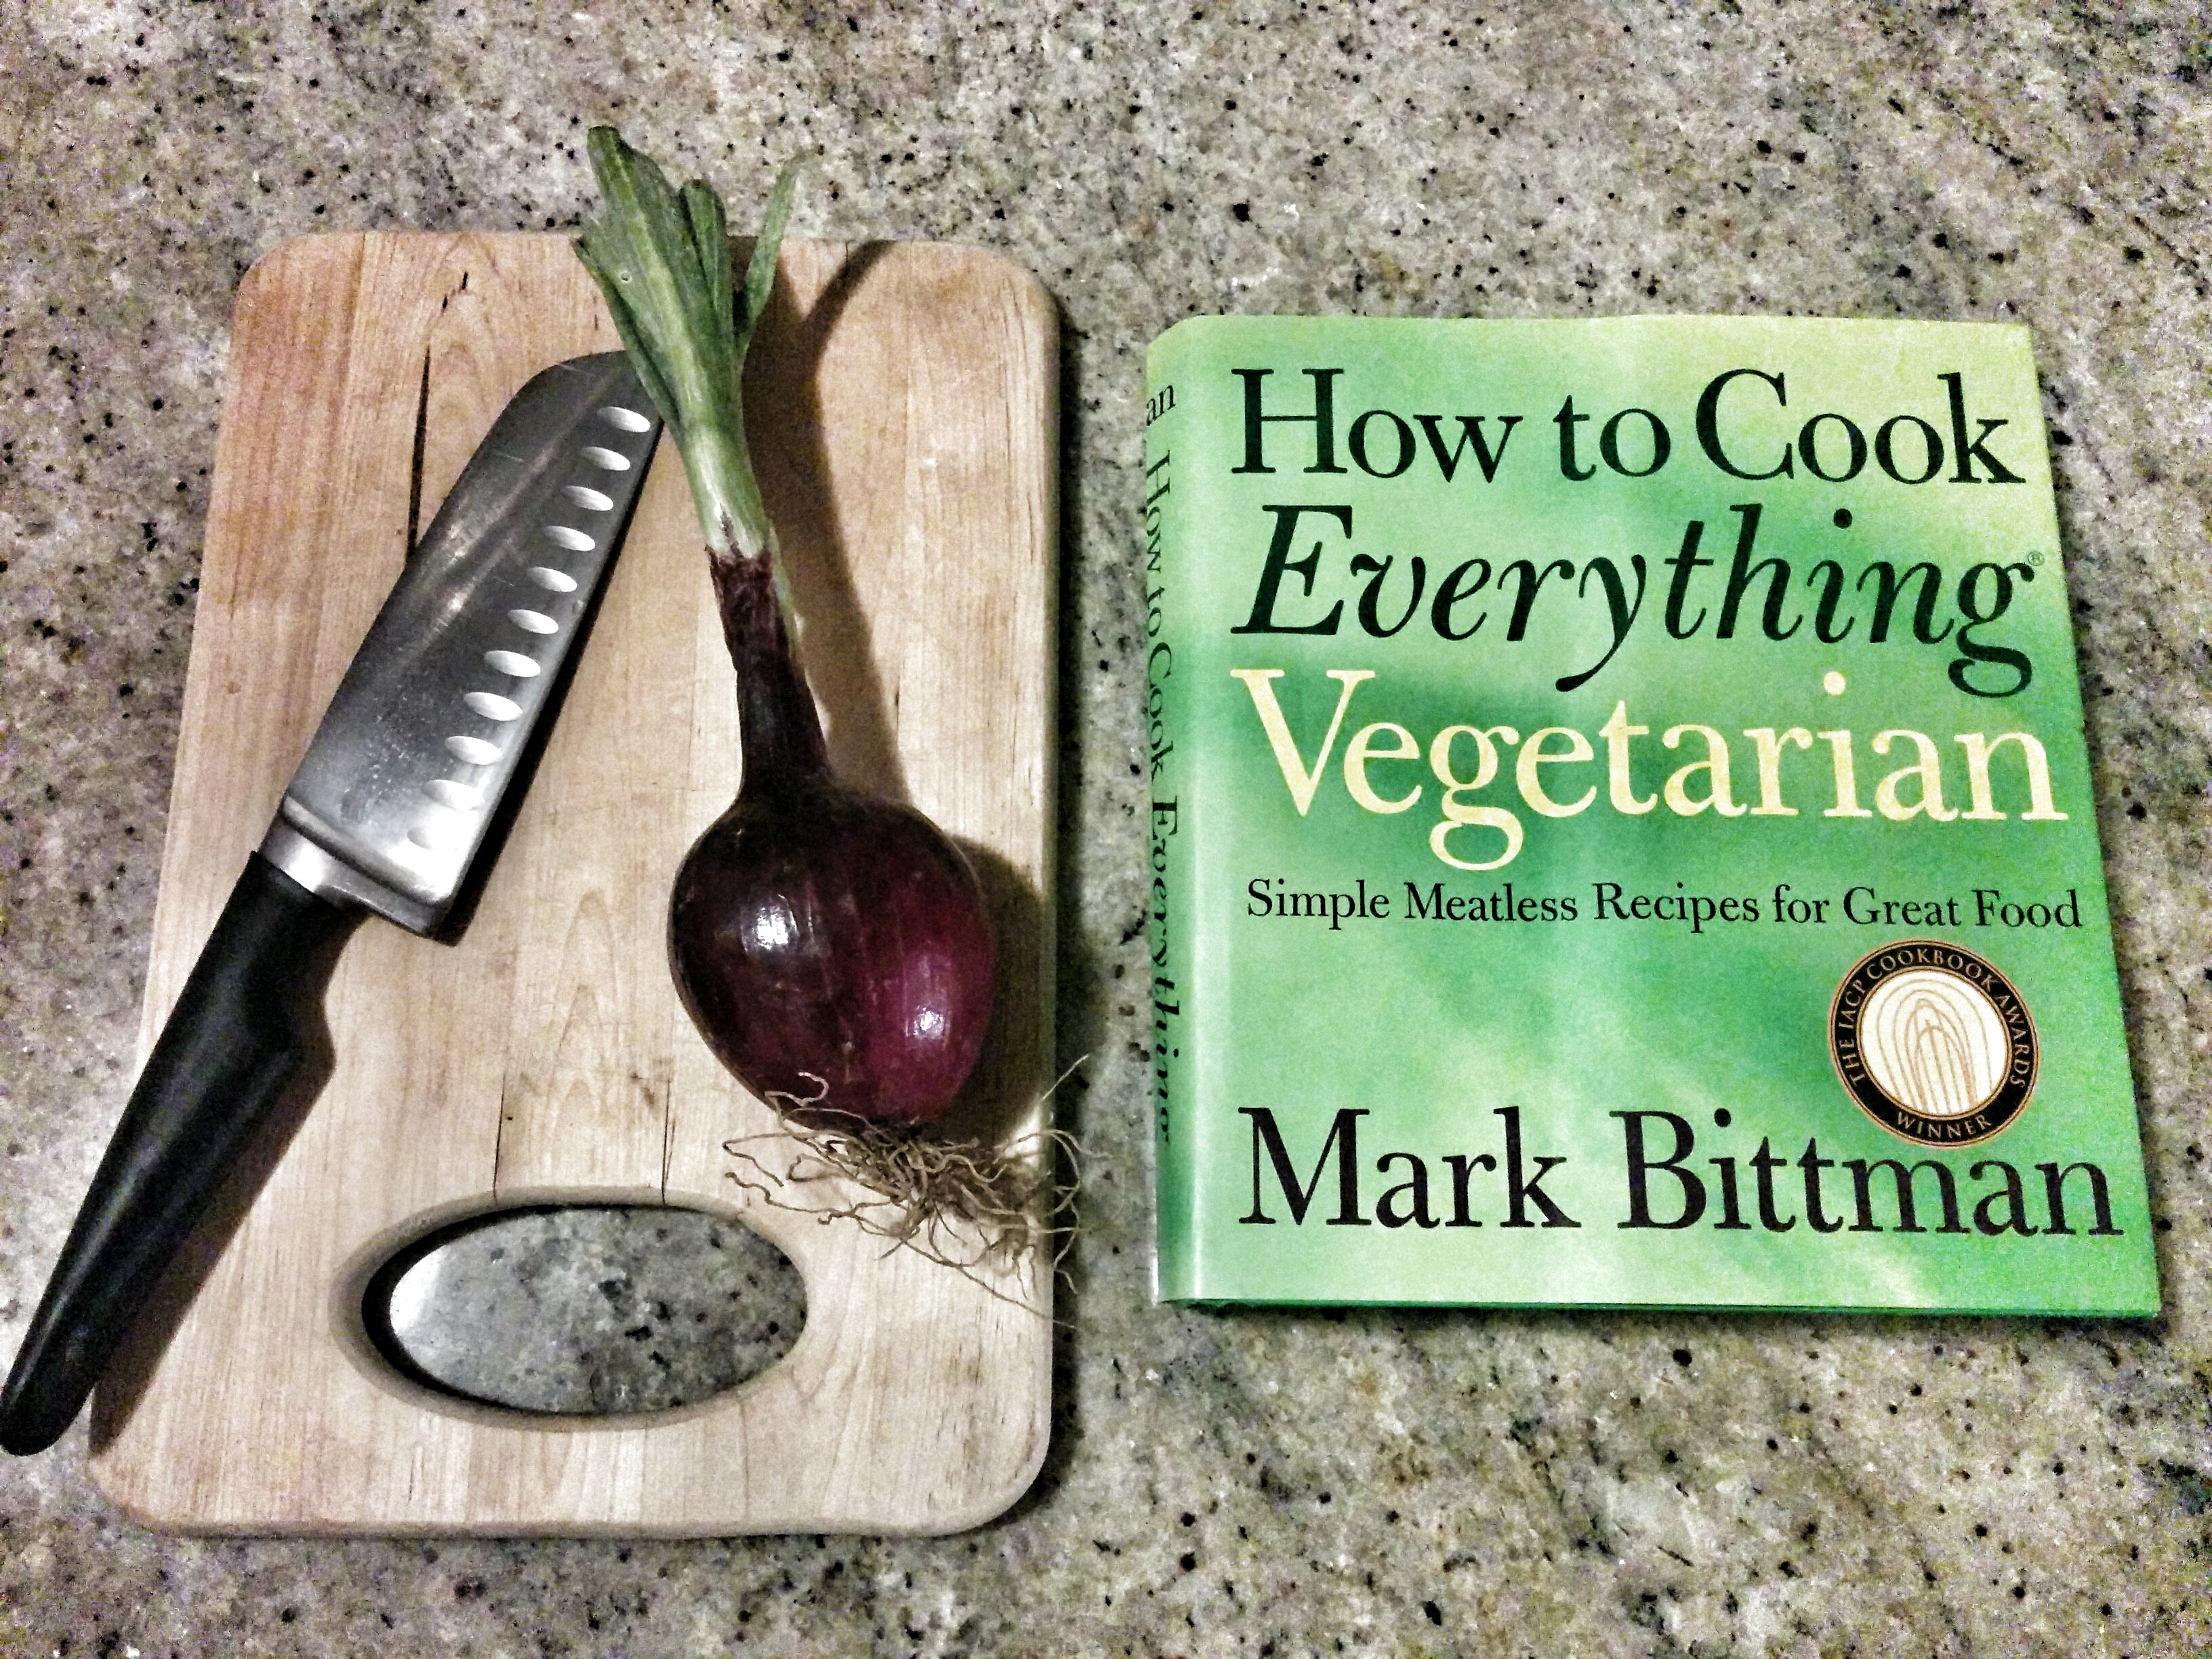 Mark Bittman Vegetarian Recipes
 Learning to Cook Having Fun in the Kitchen and